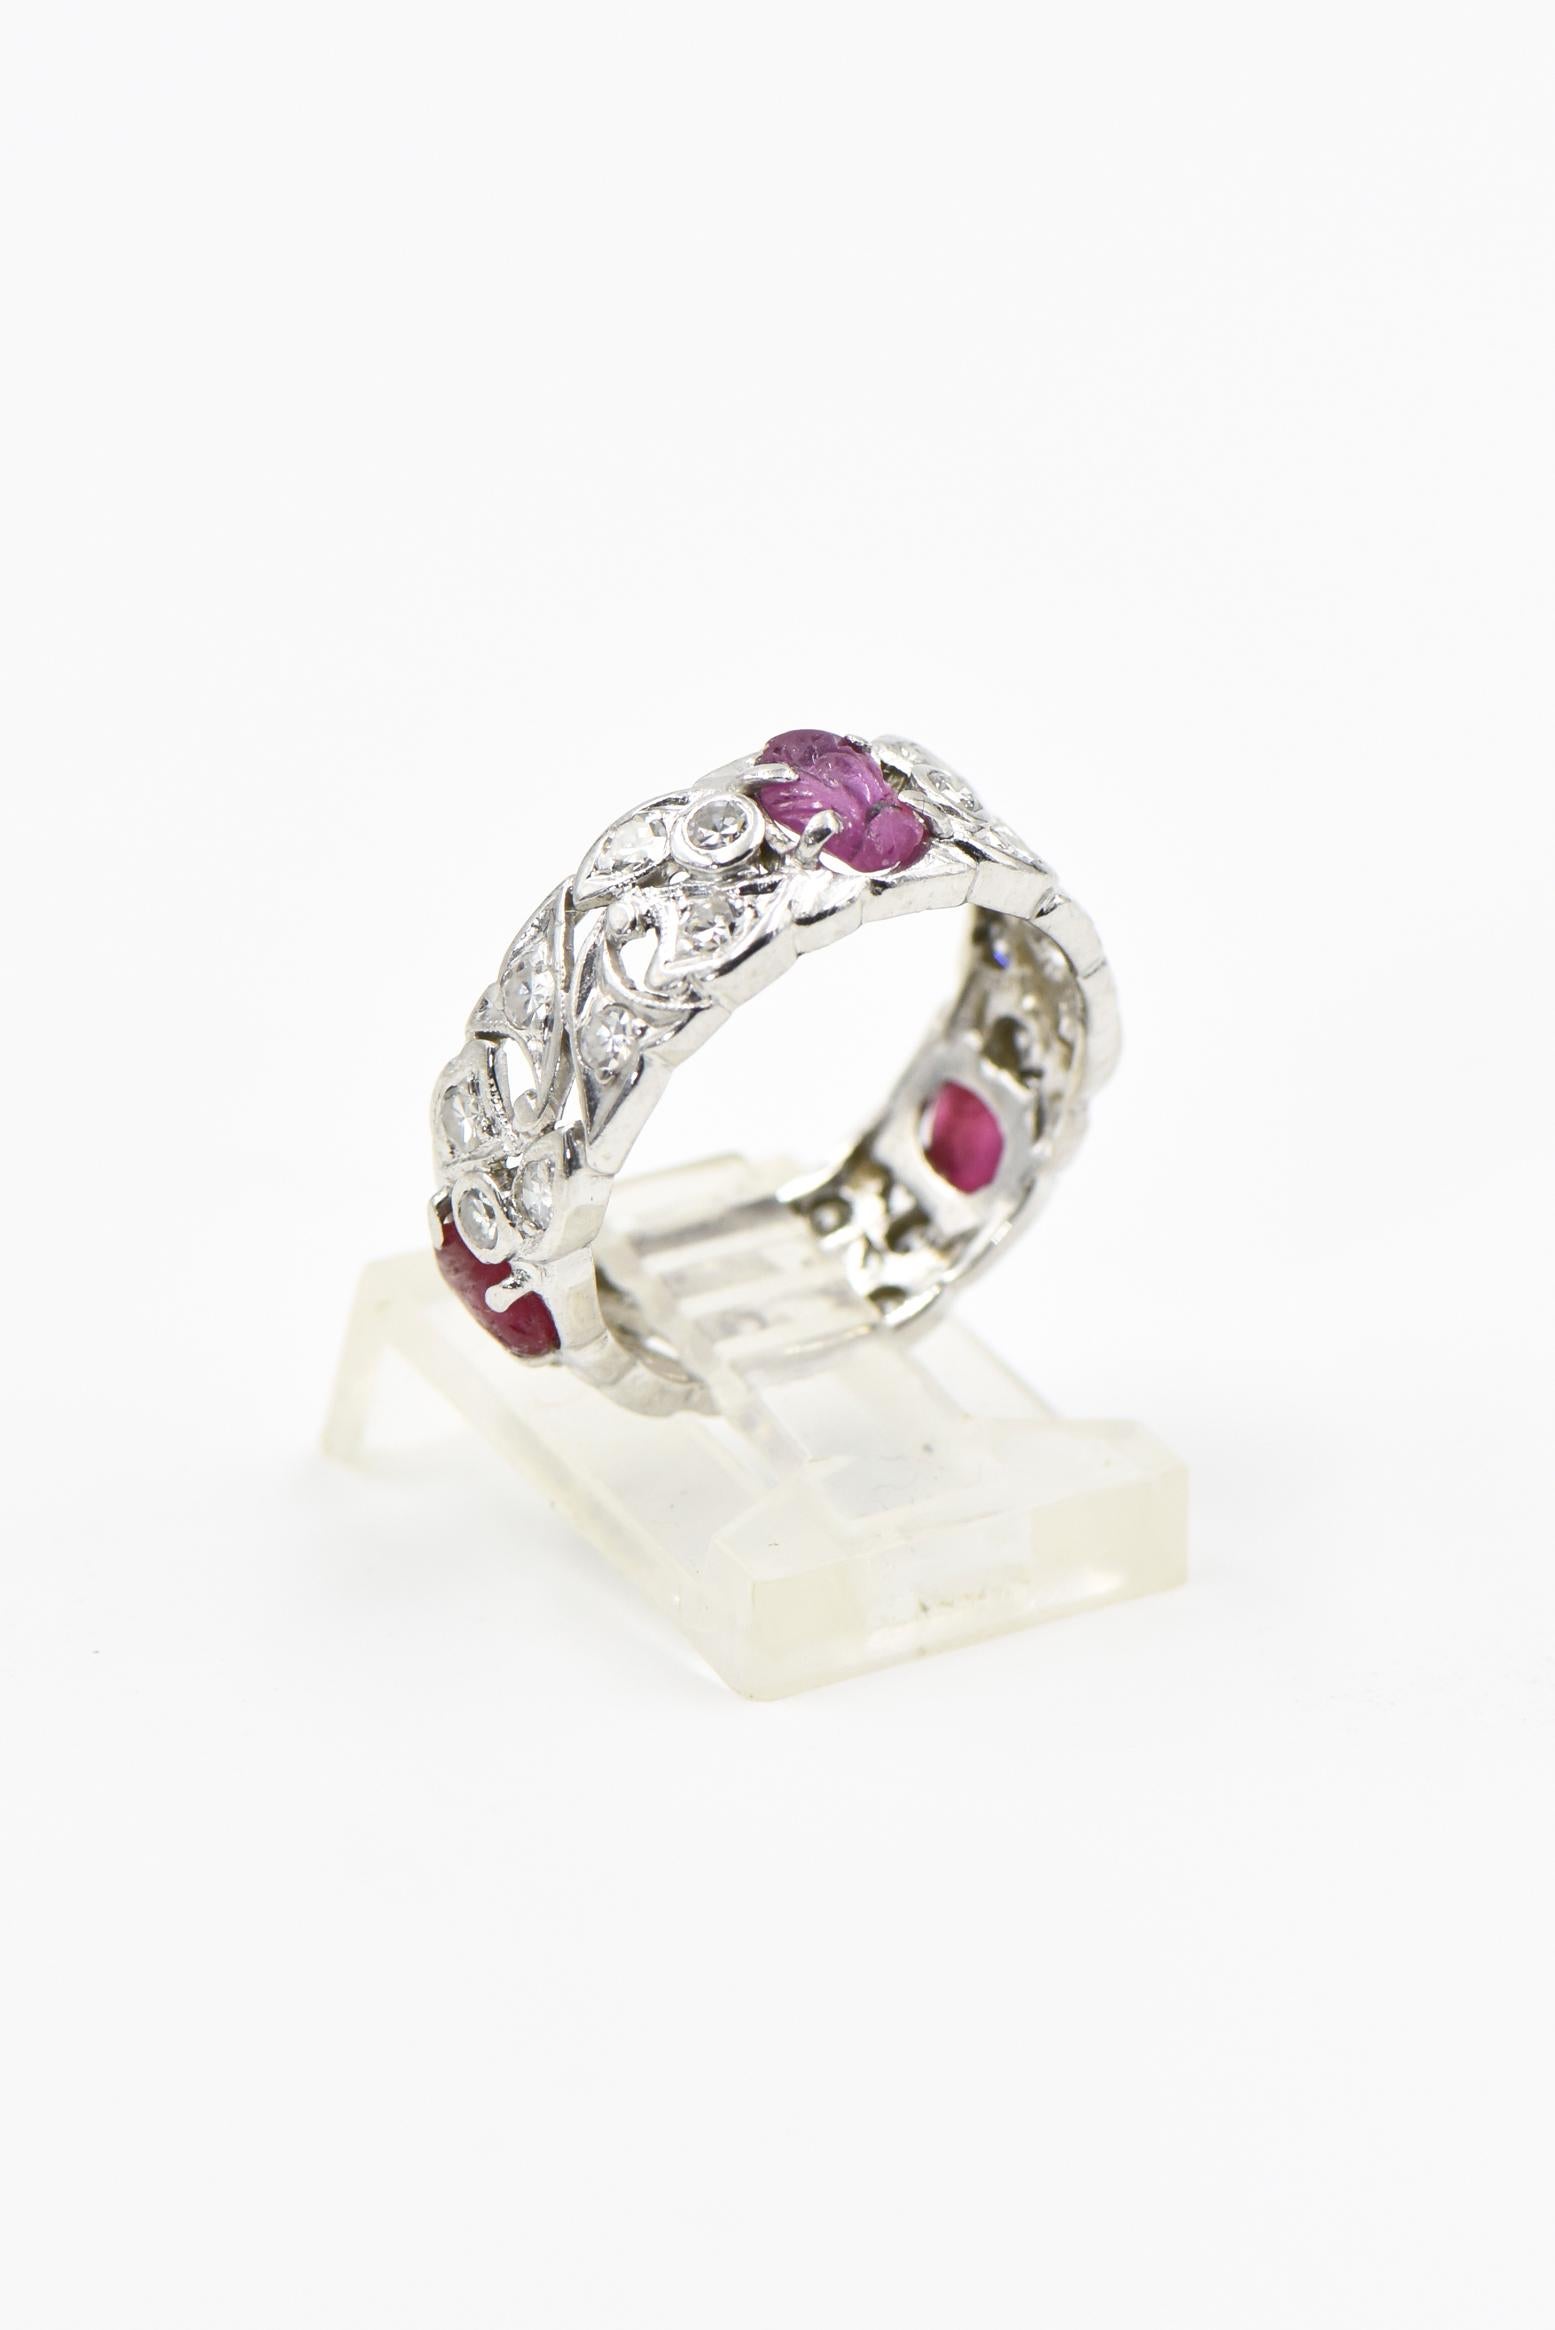 This stunning Art Deco platinum ring features 3 rubies with leaf carvings prong set between diamond vines.  The ring has approximately 1 carat of diamonds.  

US size 7.